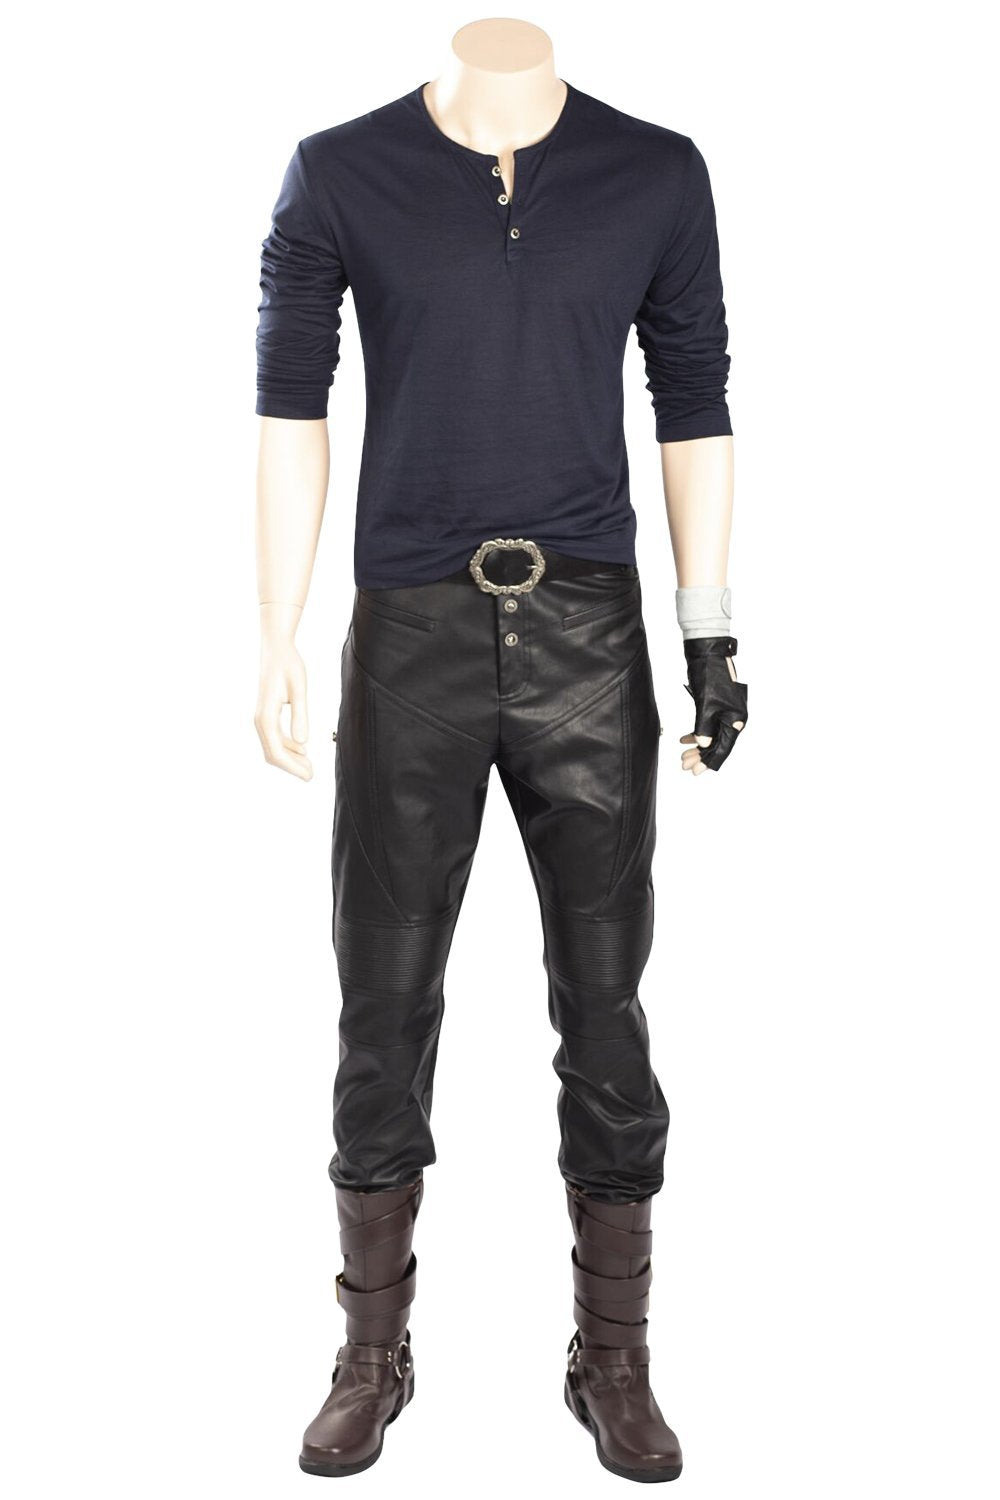 Dmc Devil May Cry 5 V Dante Outfit Trenchcoat Cosplay Kostüm